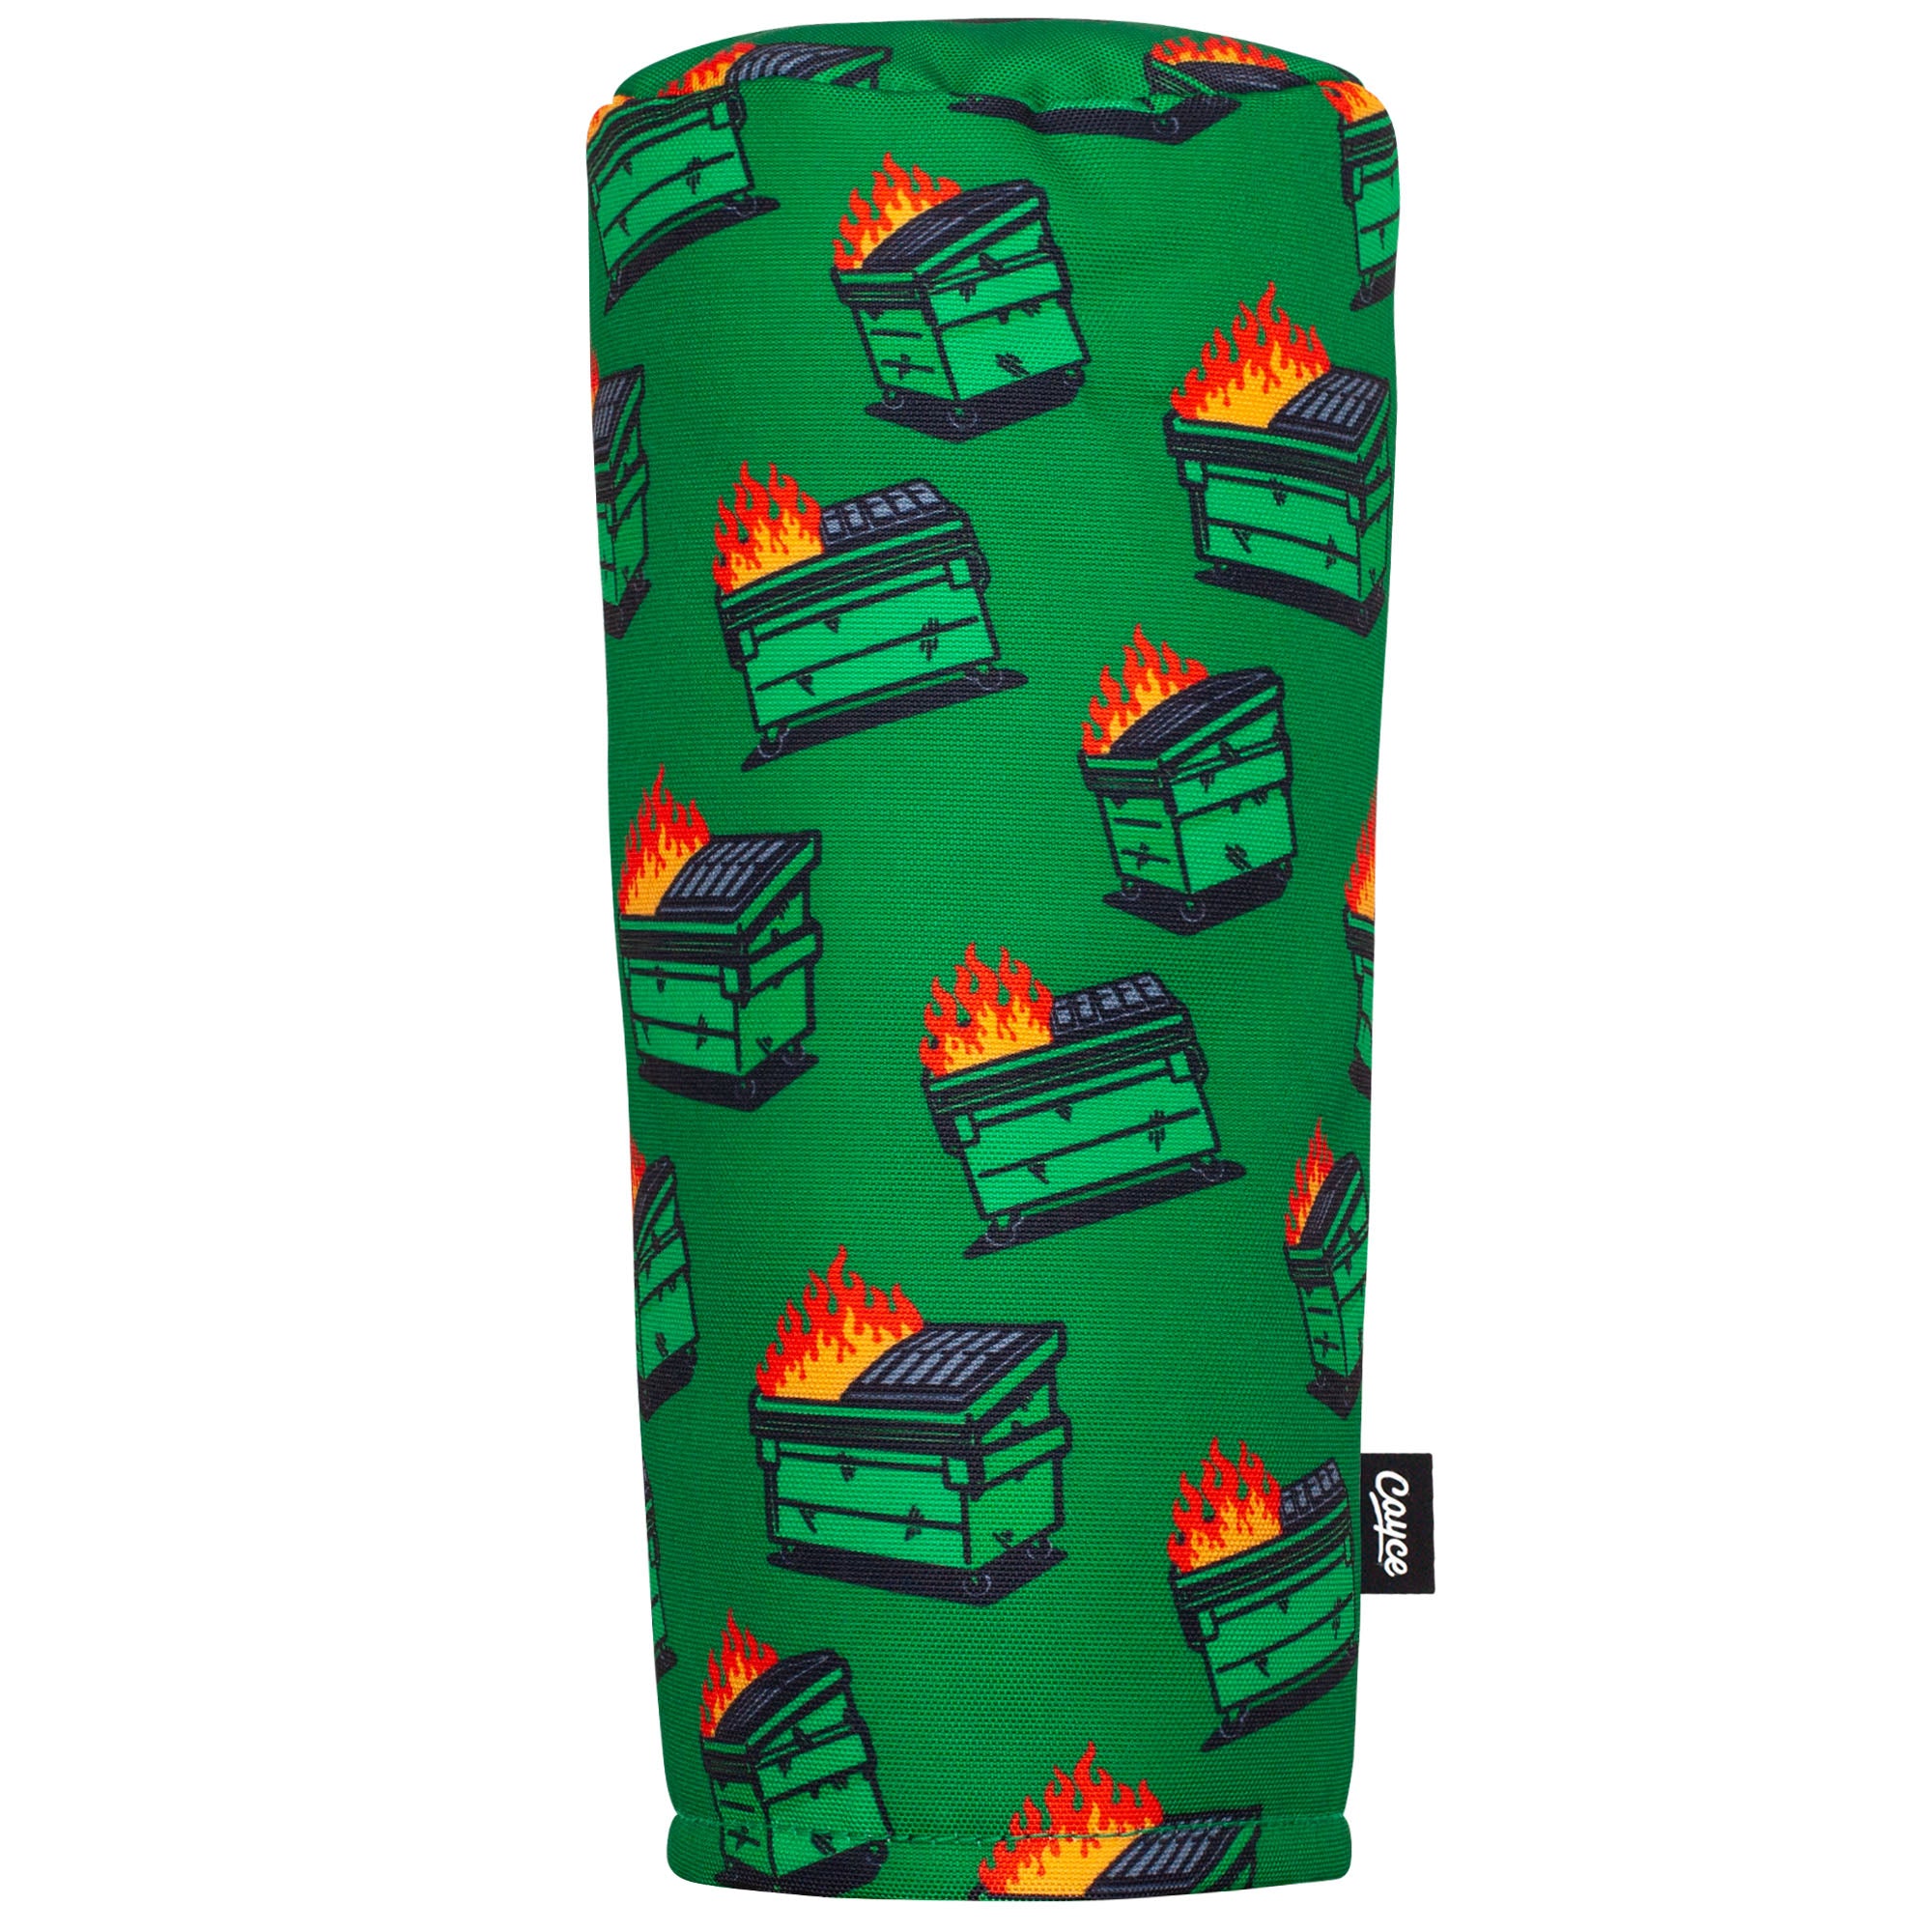 green, barrel shaped golf headcover with a dancing dumpster fire pattern sitting on a white background